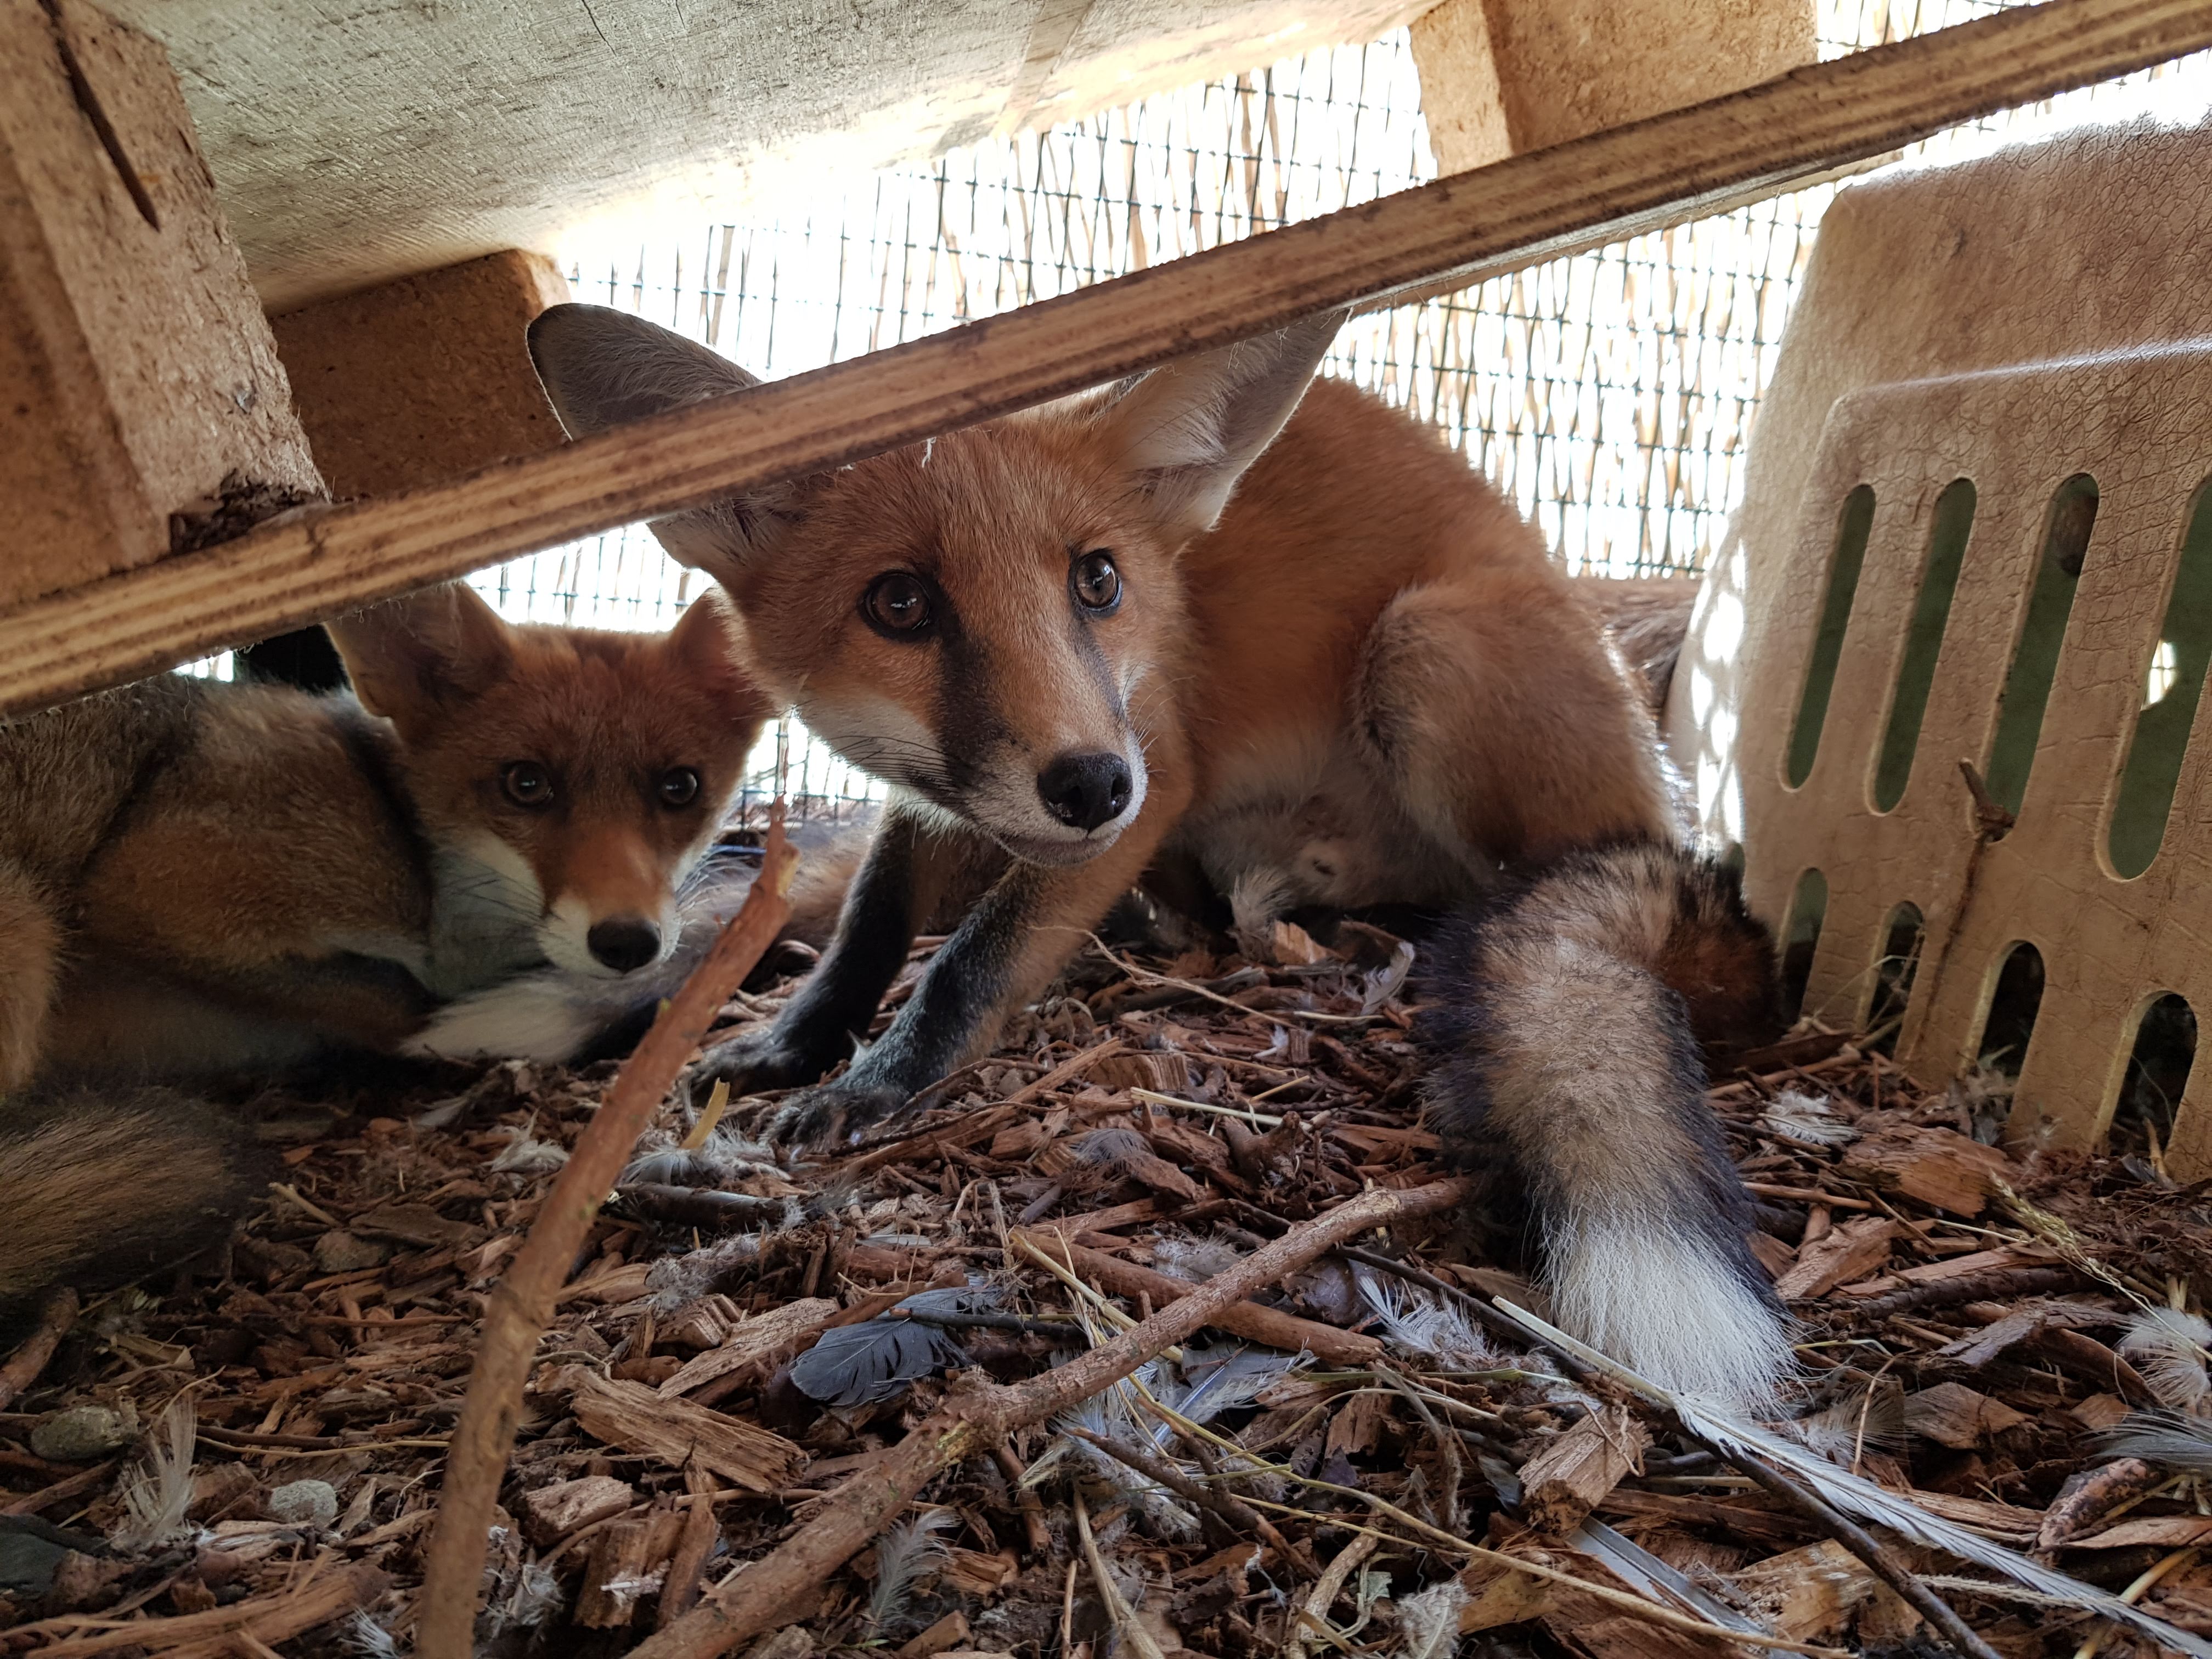 Jupiter and Vesta, two malnourished fox cubs that were rescued, rehabilitated and released back into the wild by HART